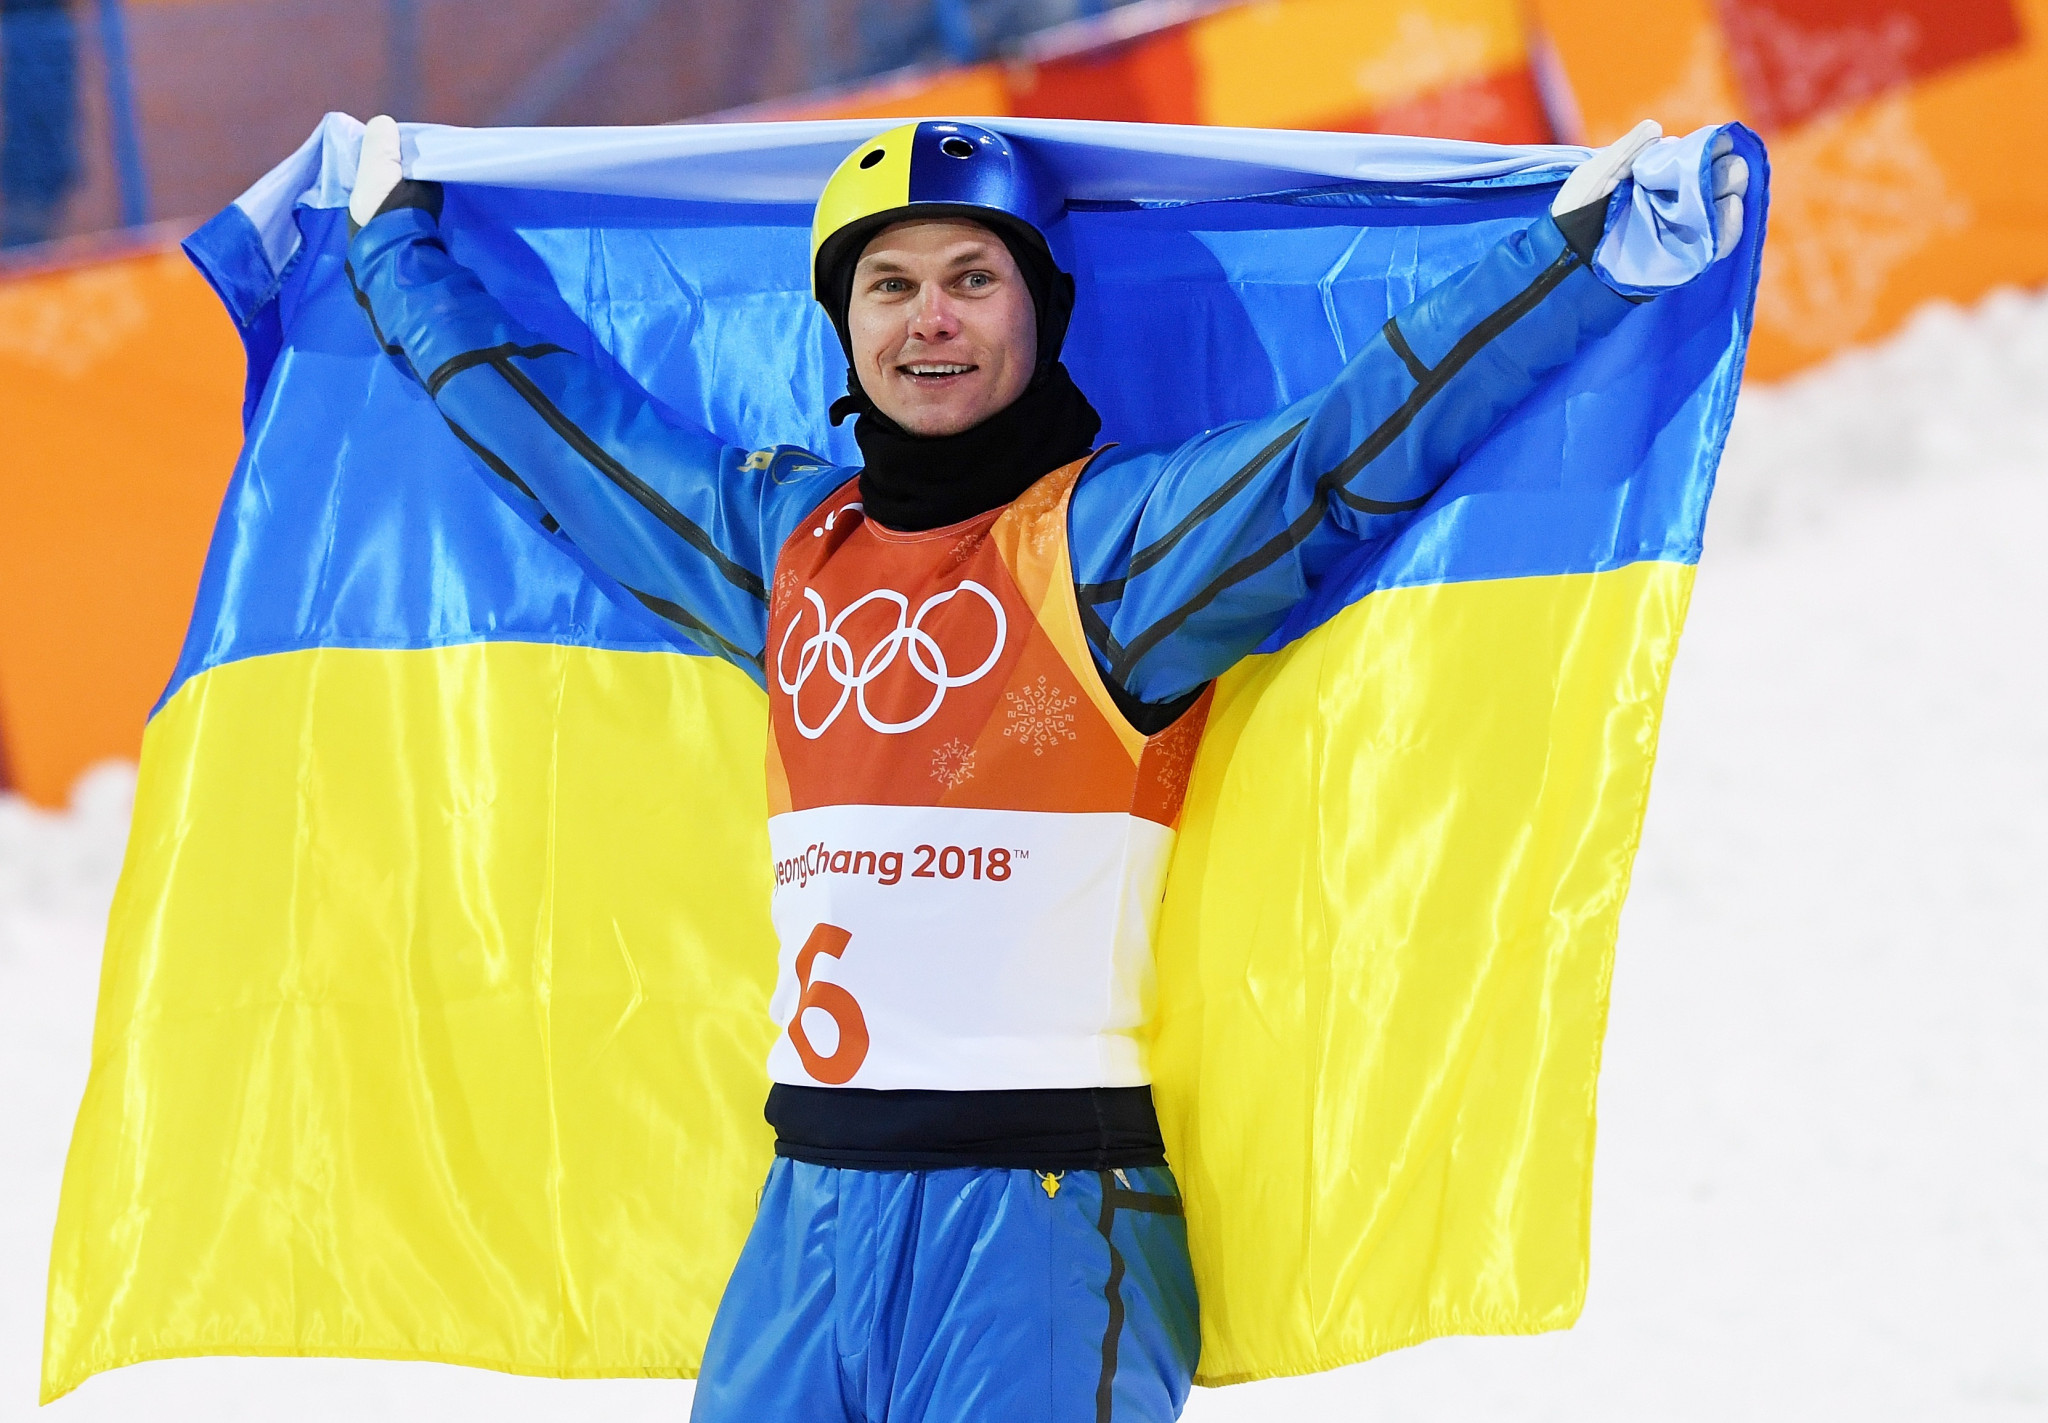 Abramenko becomes first man from Ukraine to win Olympic medal with gold in men's aerials